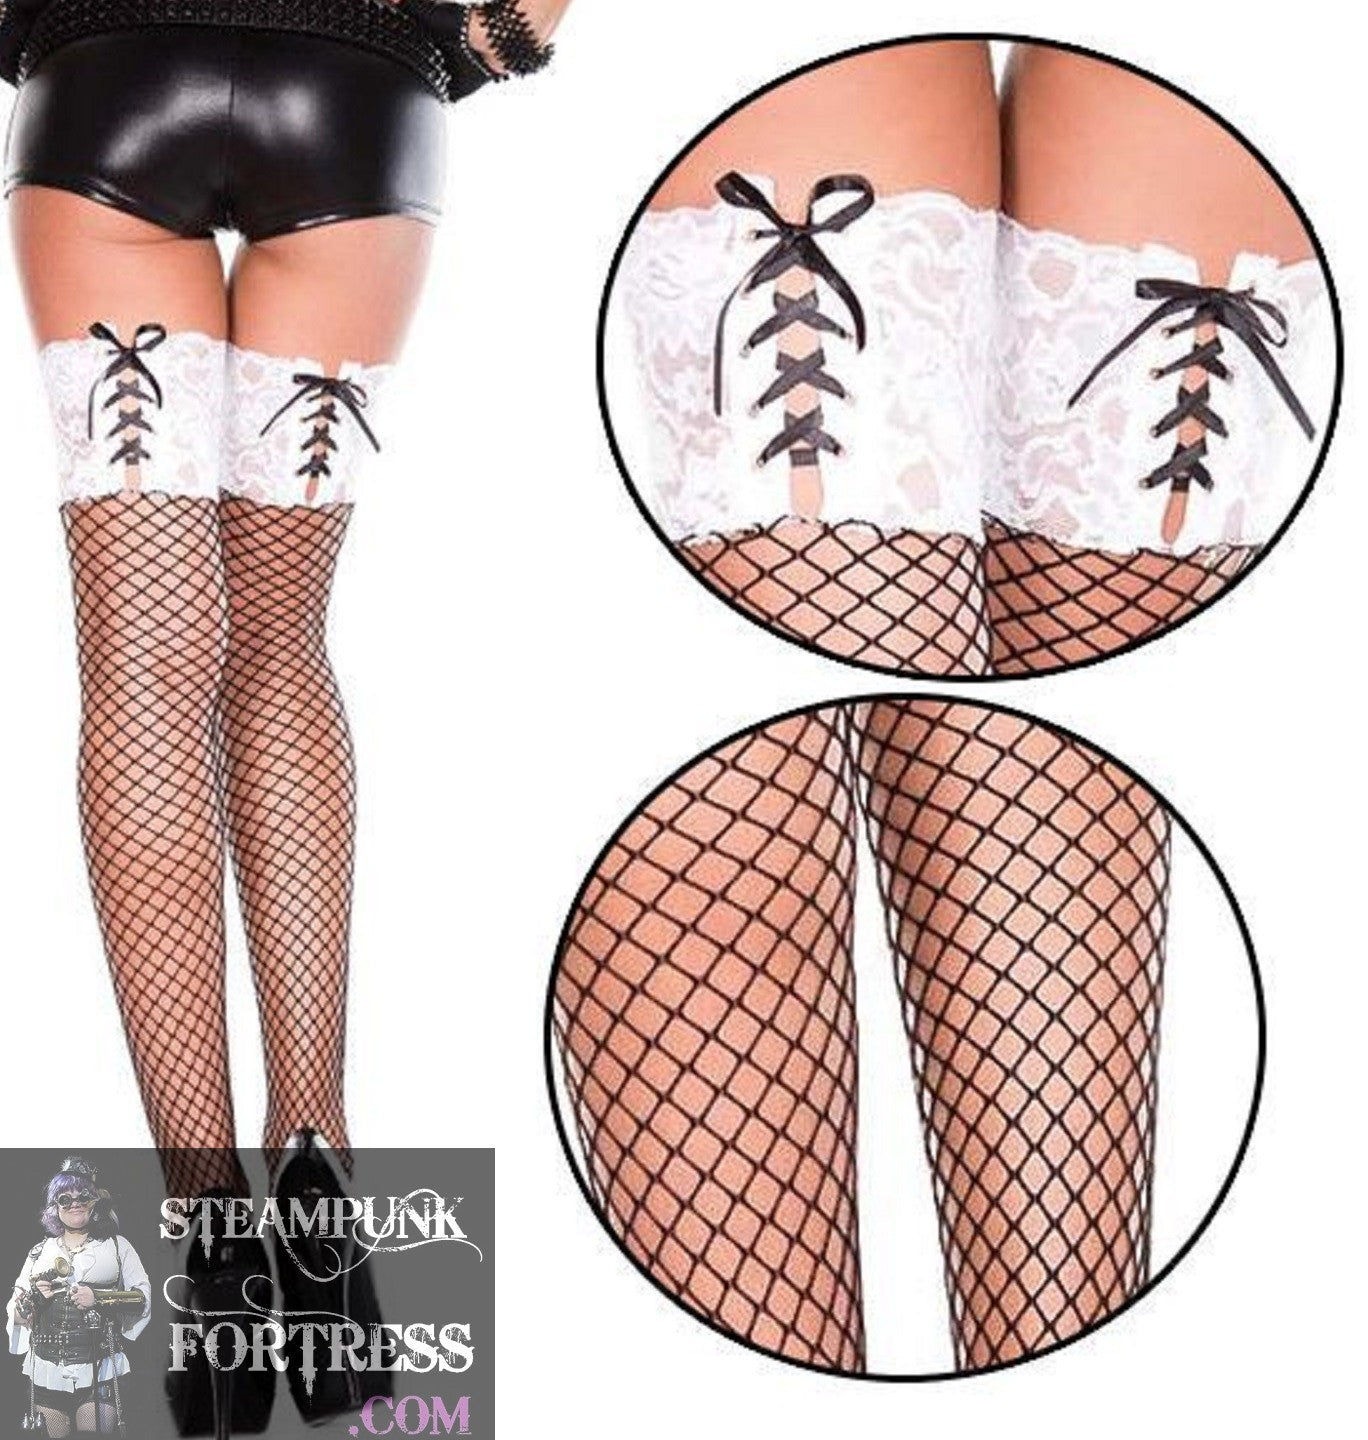 BLACK FISHNET THIGH HIGHS LIGHT PINK CORSET LACE UP TOP 80S COSPLAY COSTUME HALLOWEEN- MASS PRODUCED